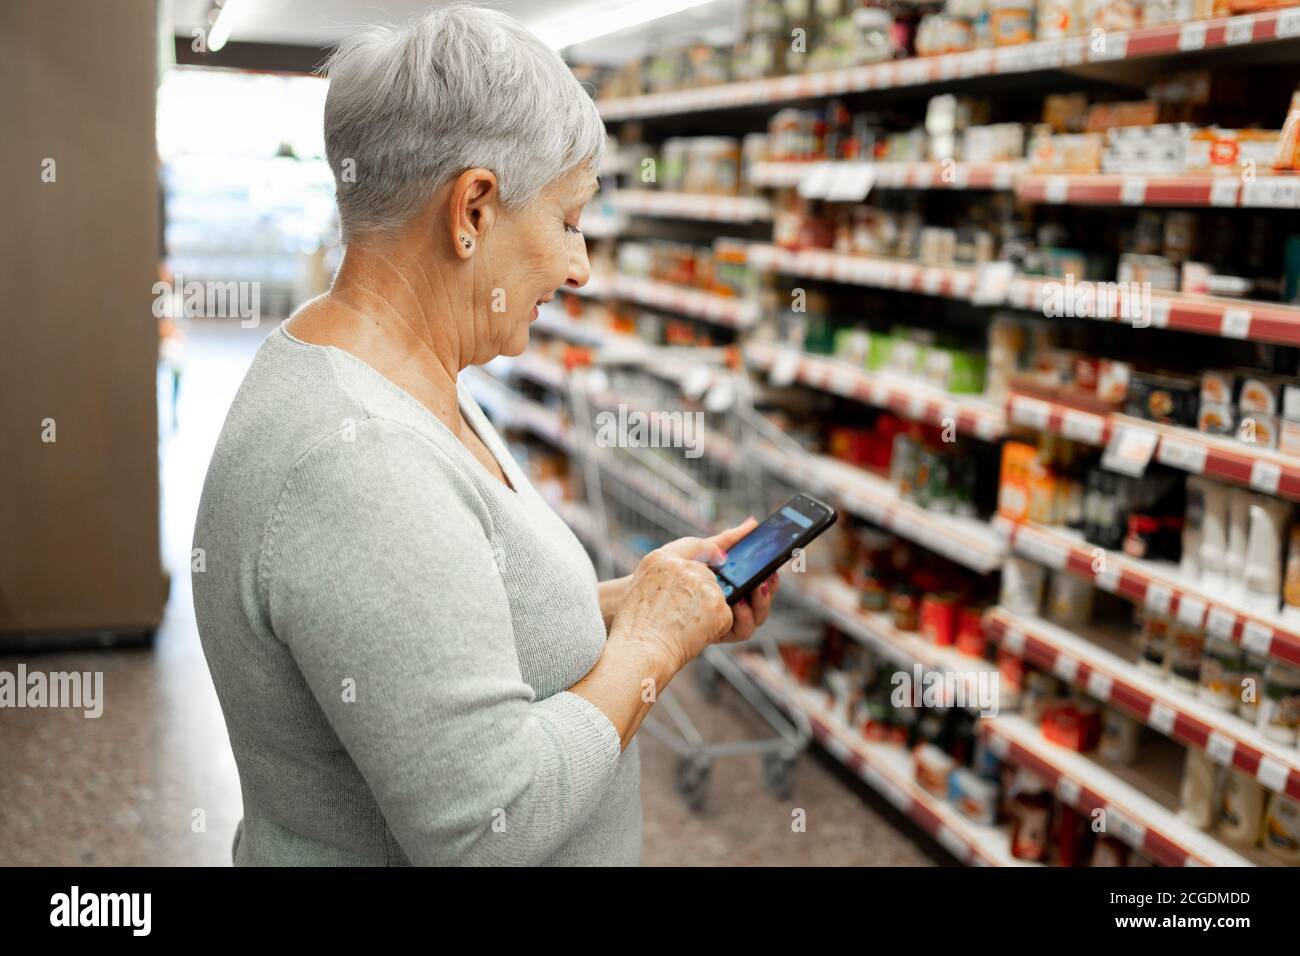 Caucasian elderly woman with white hair  shopping in supermarket Stock Photo